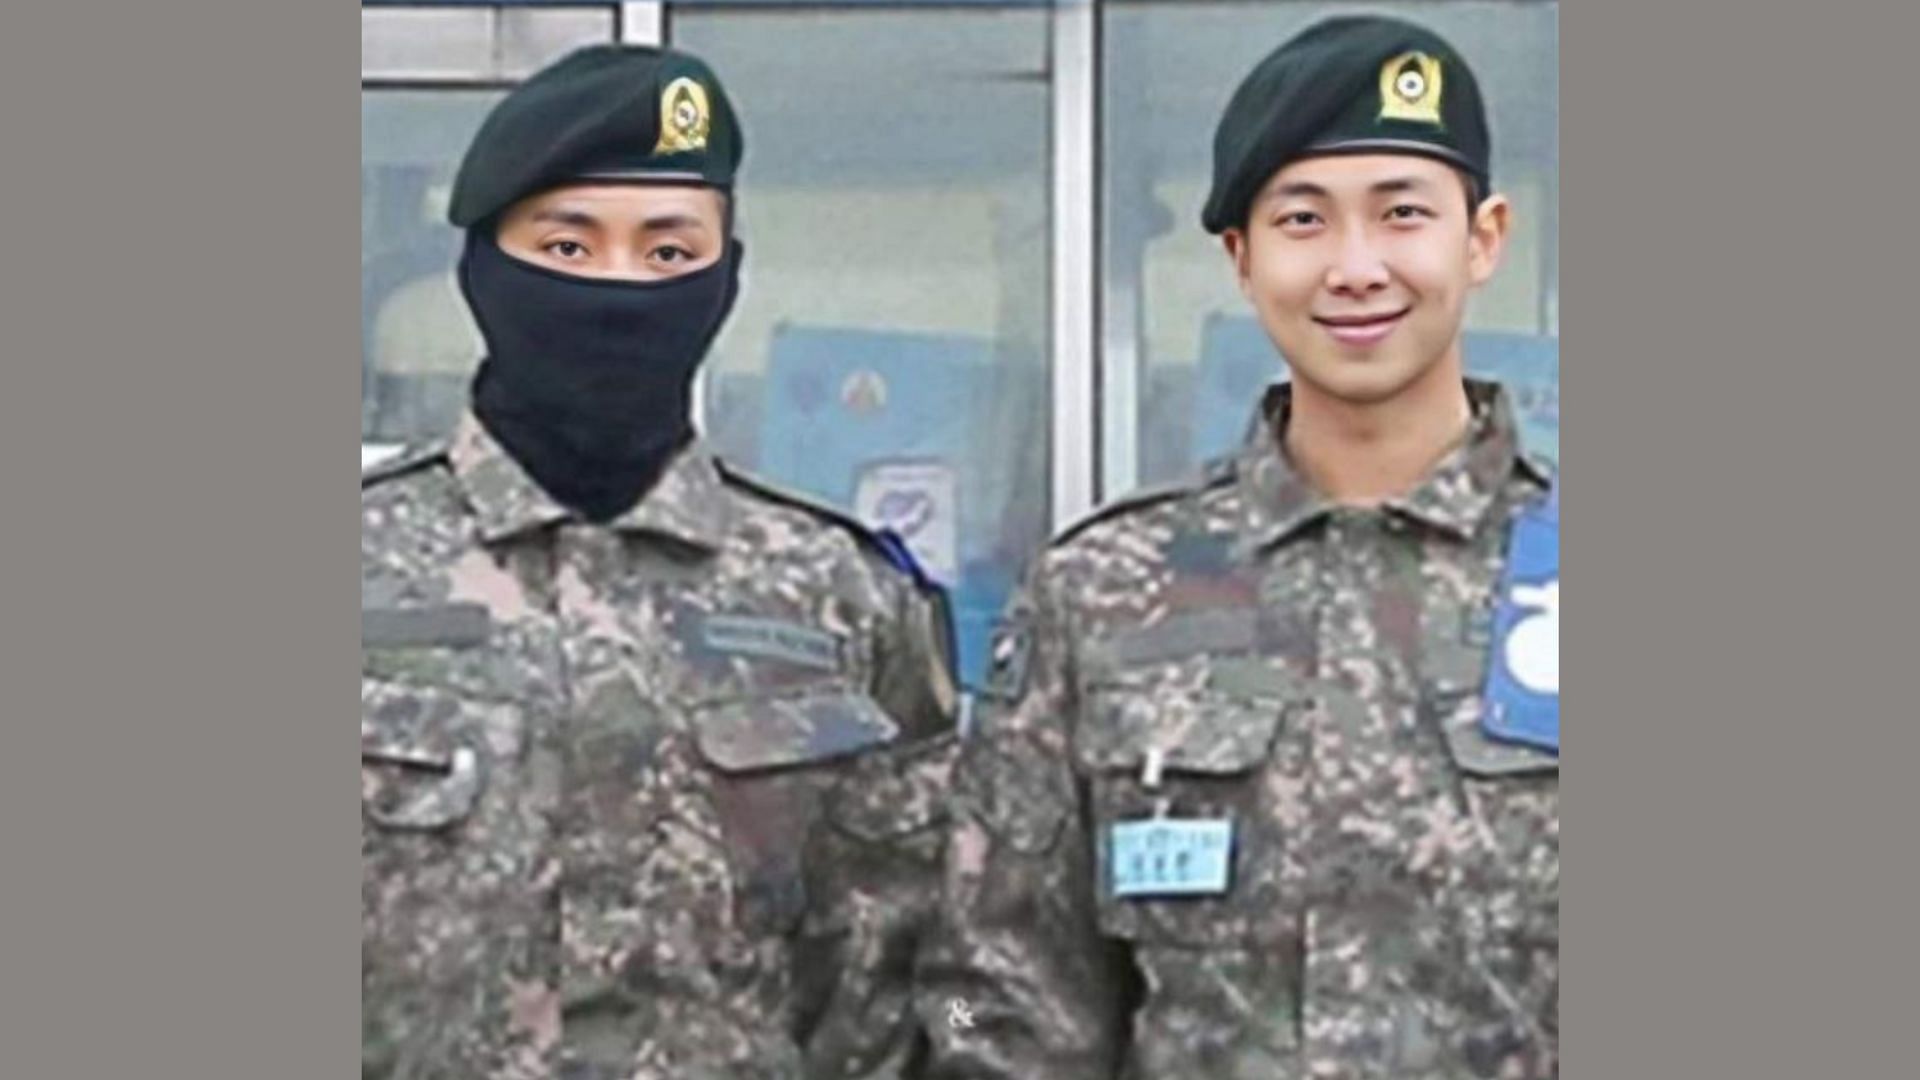 Military photos of BTS V and RM (Image via X/@global_fan_base)